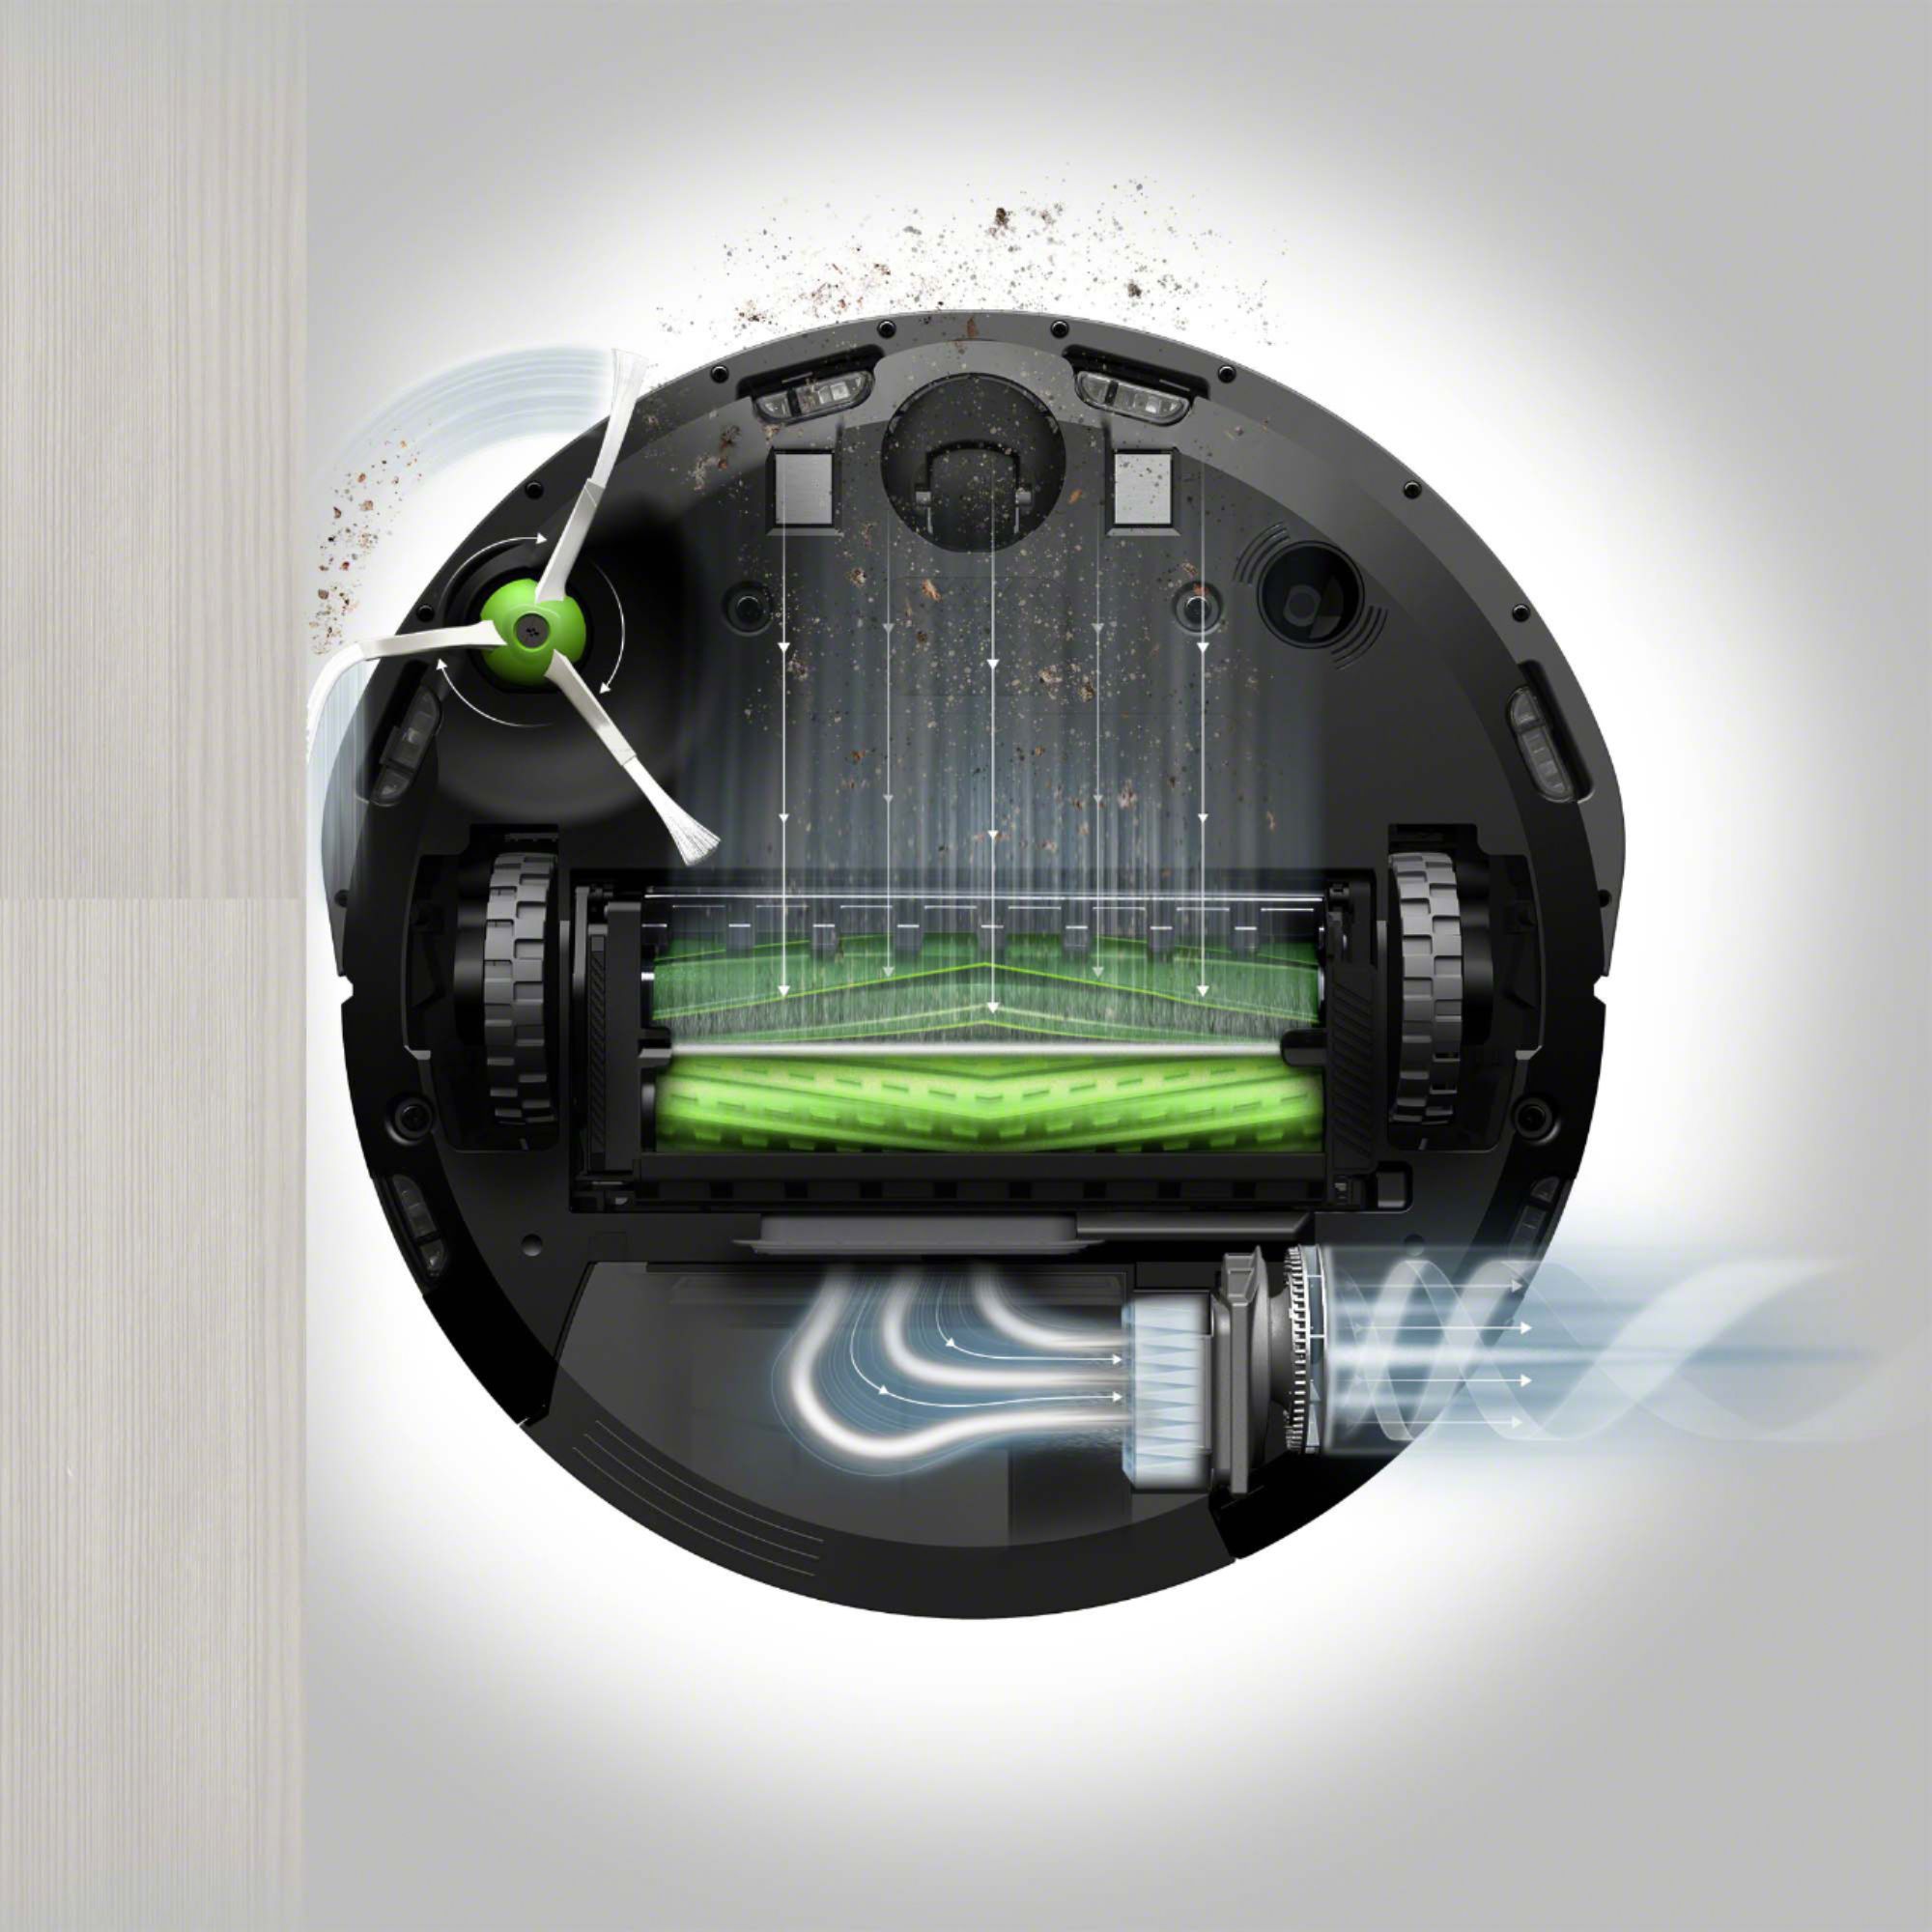 iRobot Roomba i7+ (7550) Wi-Fi Connected Self-Emptying Robot